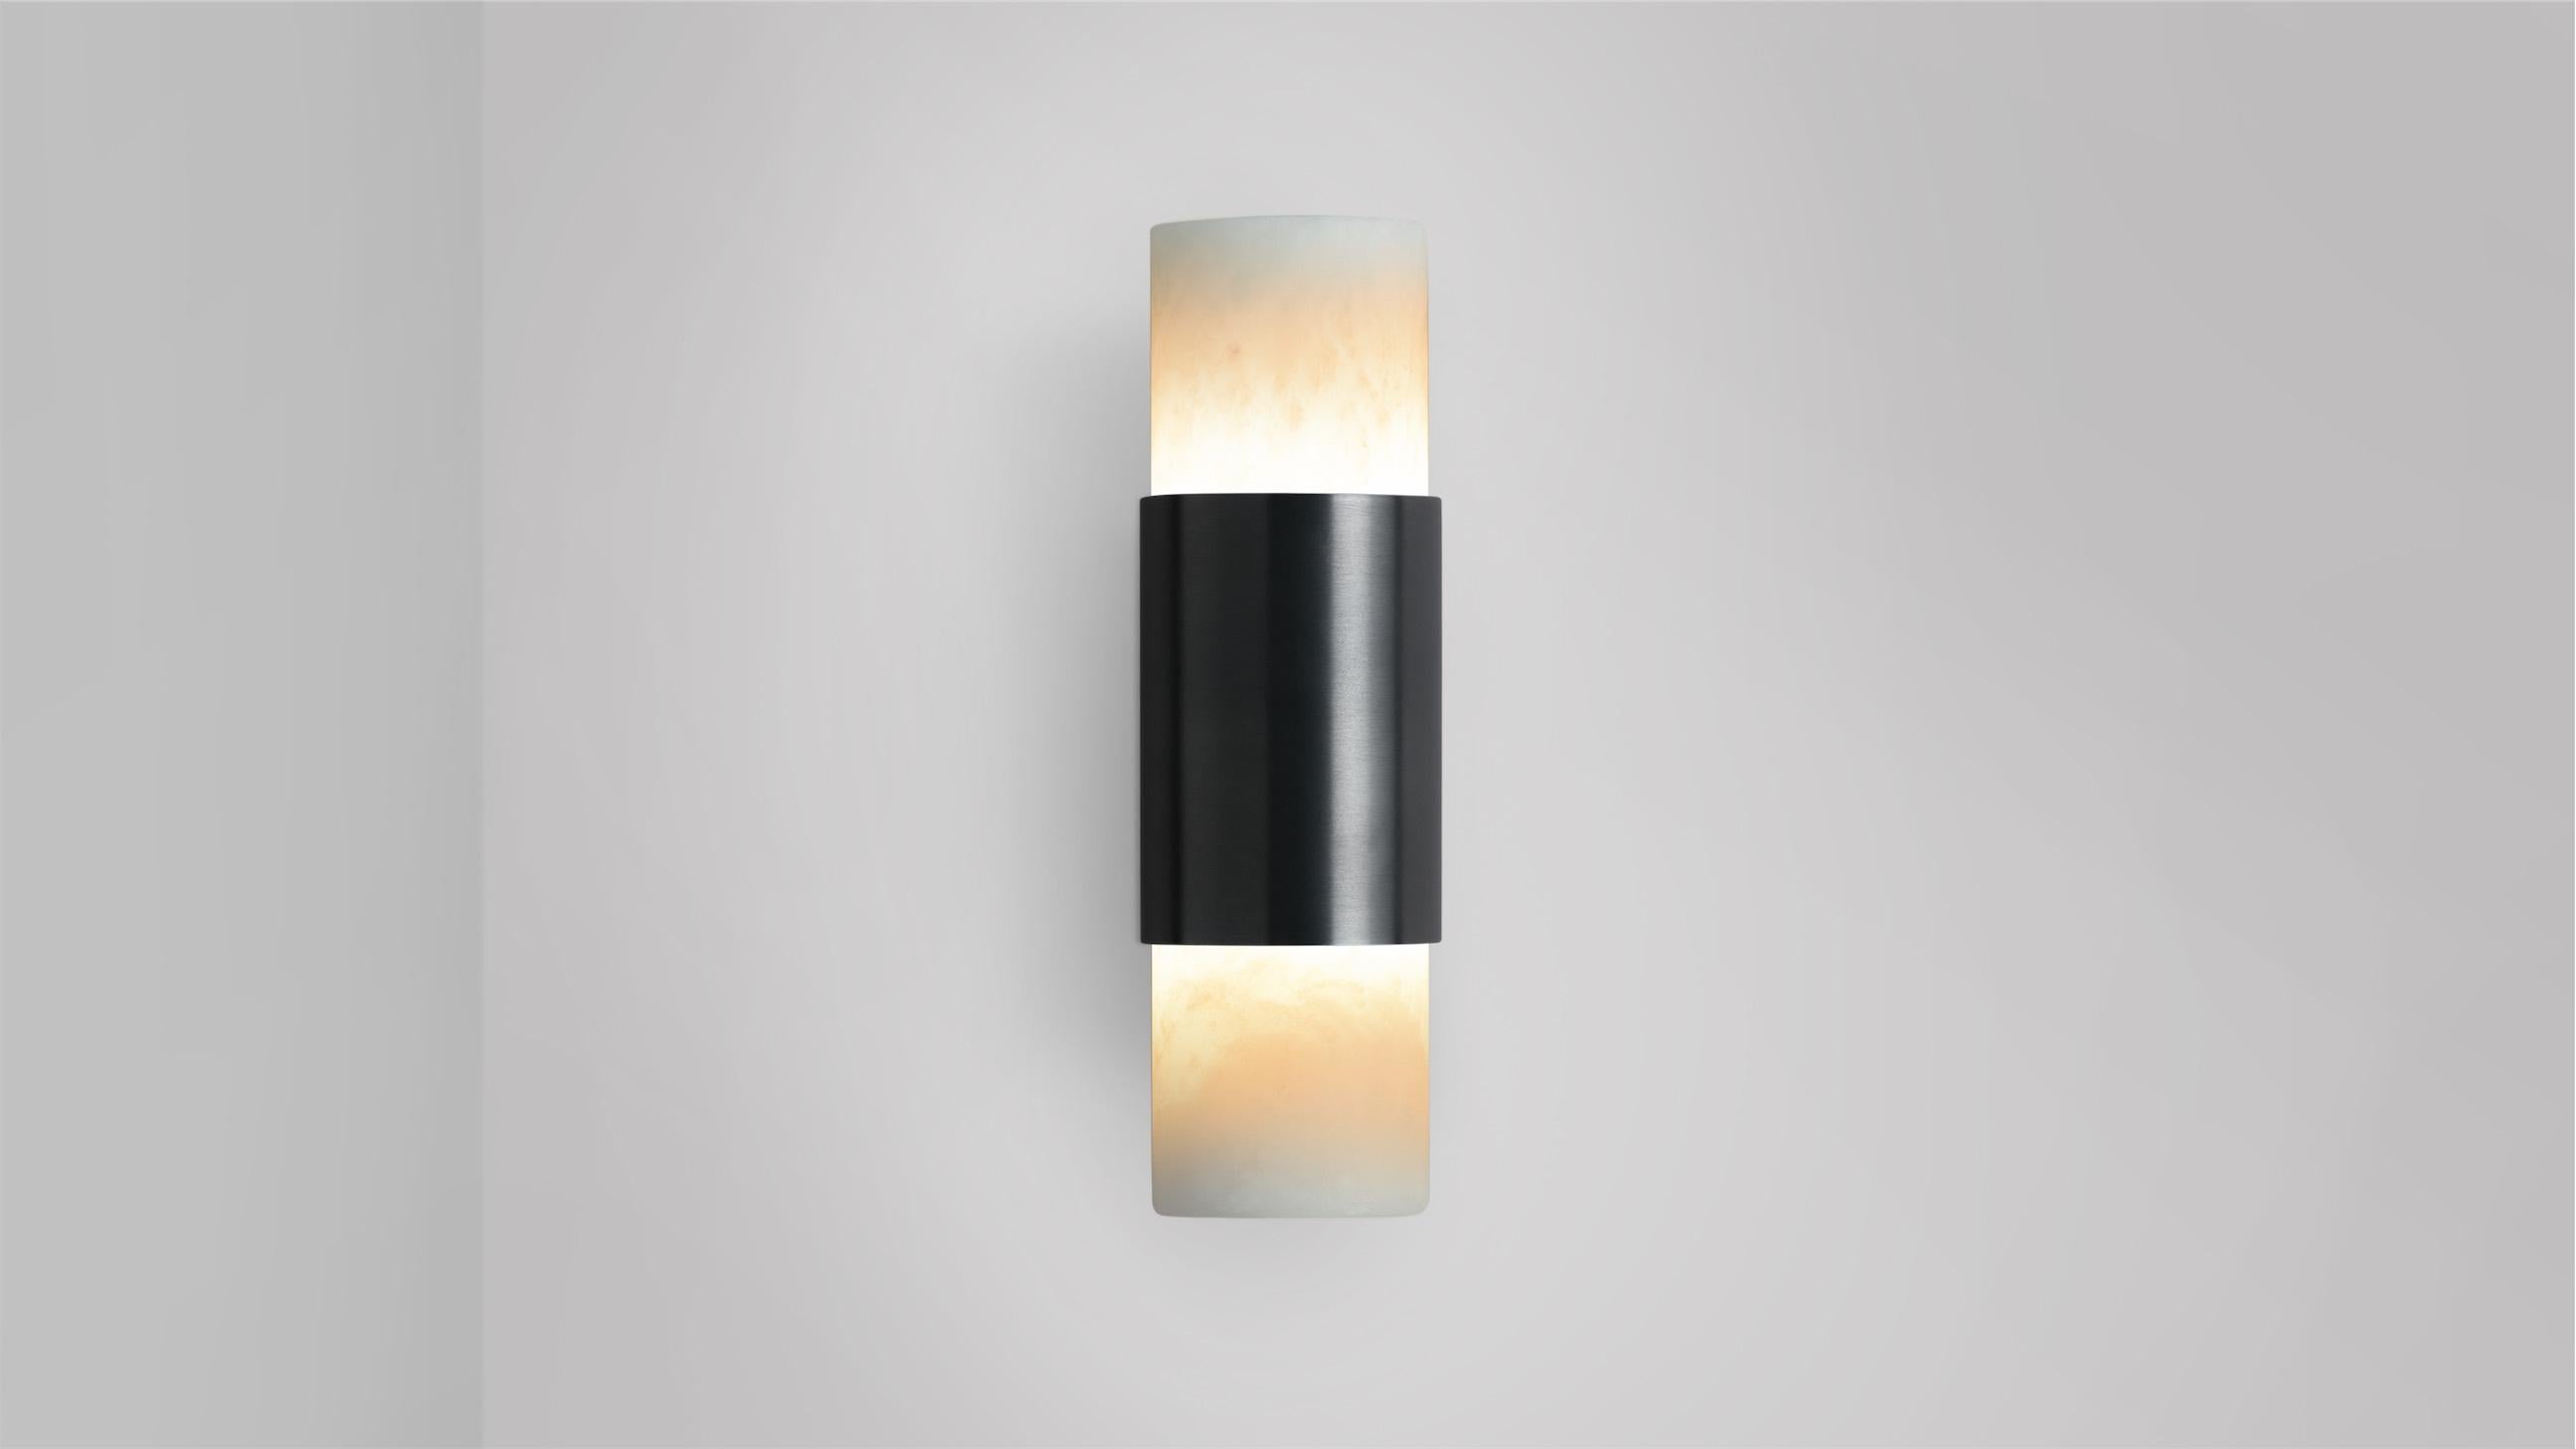 Roma wall lamp by CTO Lighting
Materials: bronze, alabaster.
Dimensions: D 8.5 x W 5.5 x H 19 cm
Available in satin brass and bronze.

Celebrating the simplicity of line and form, The Roma collection is designed to highlight the noble quality of